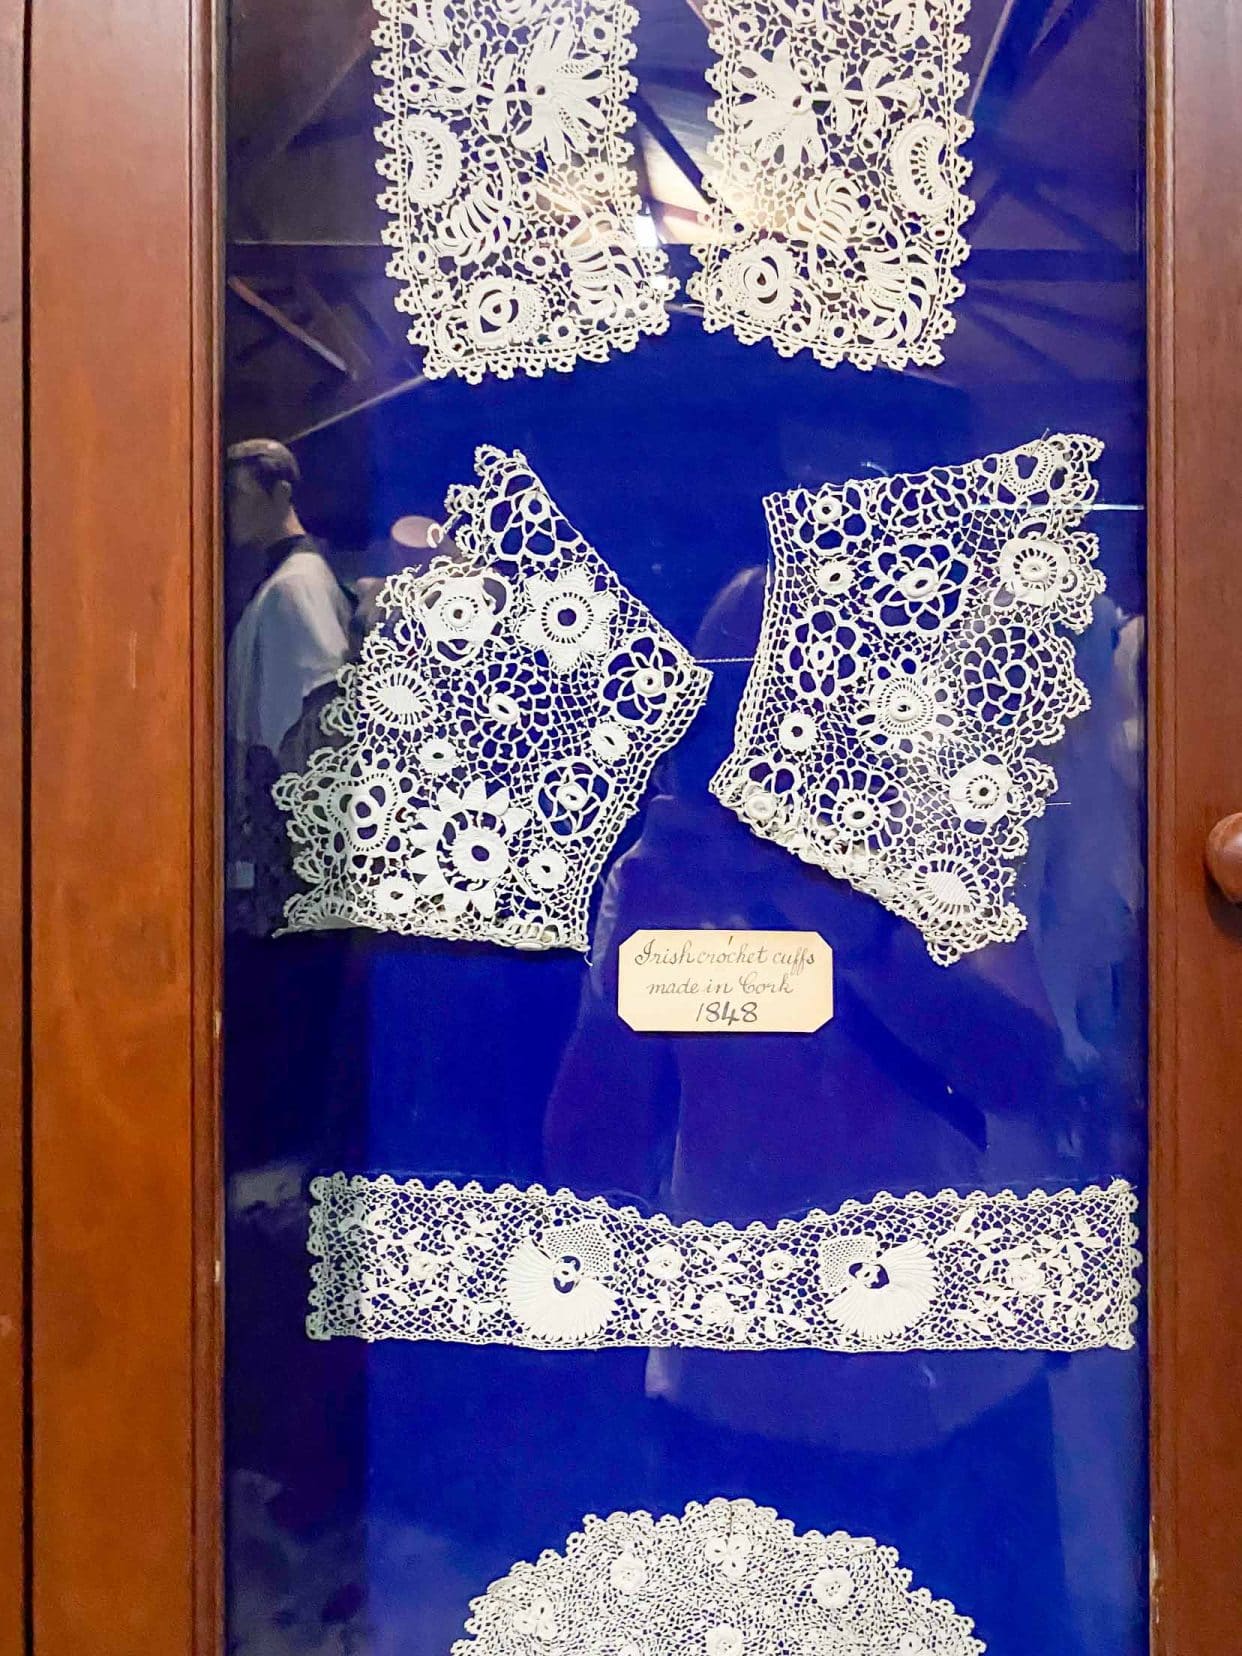 wooden Display showing lace designs on blue felt